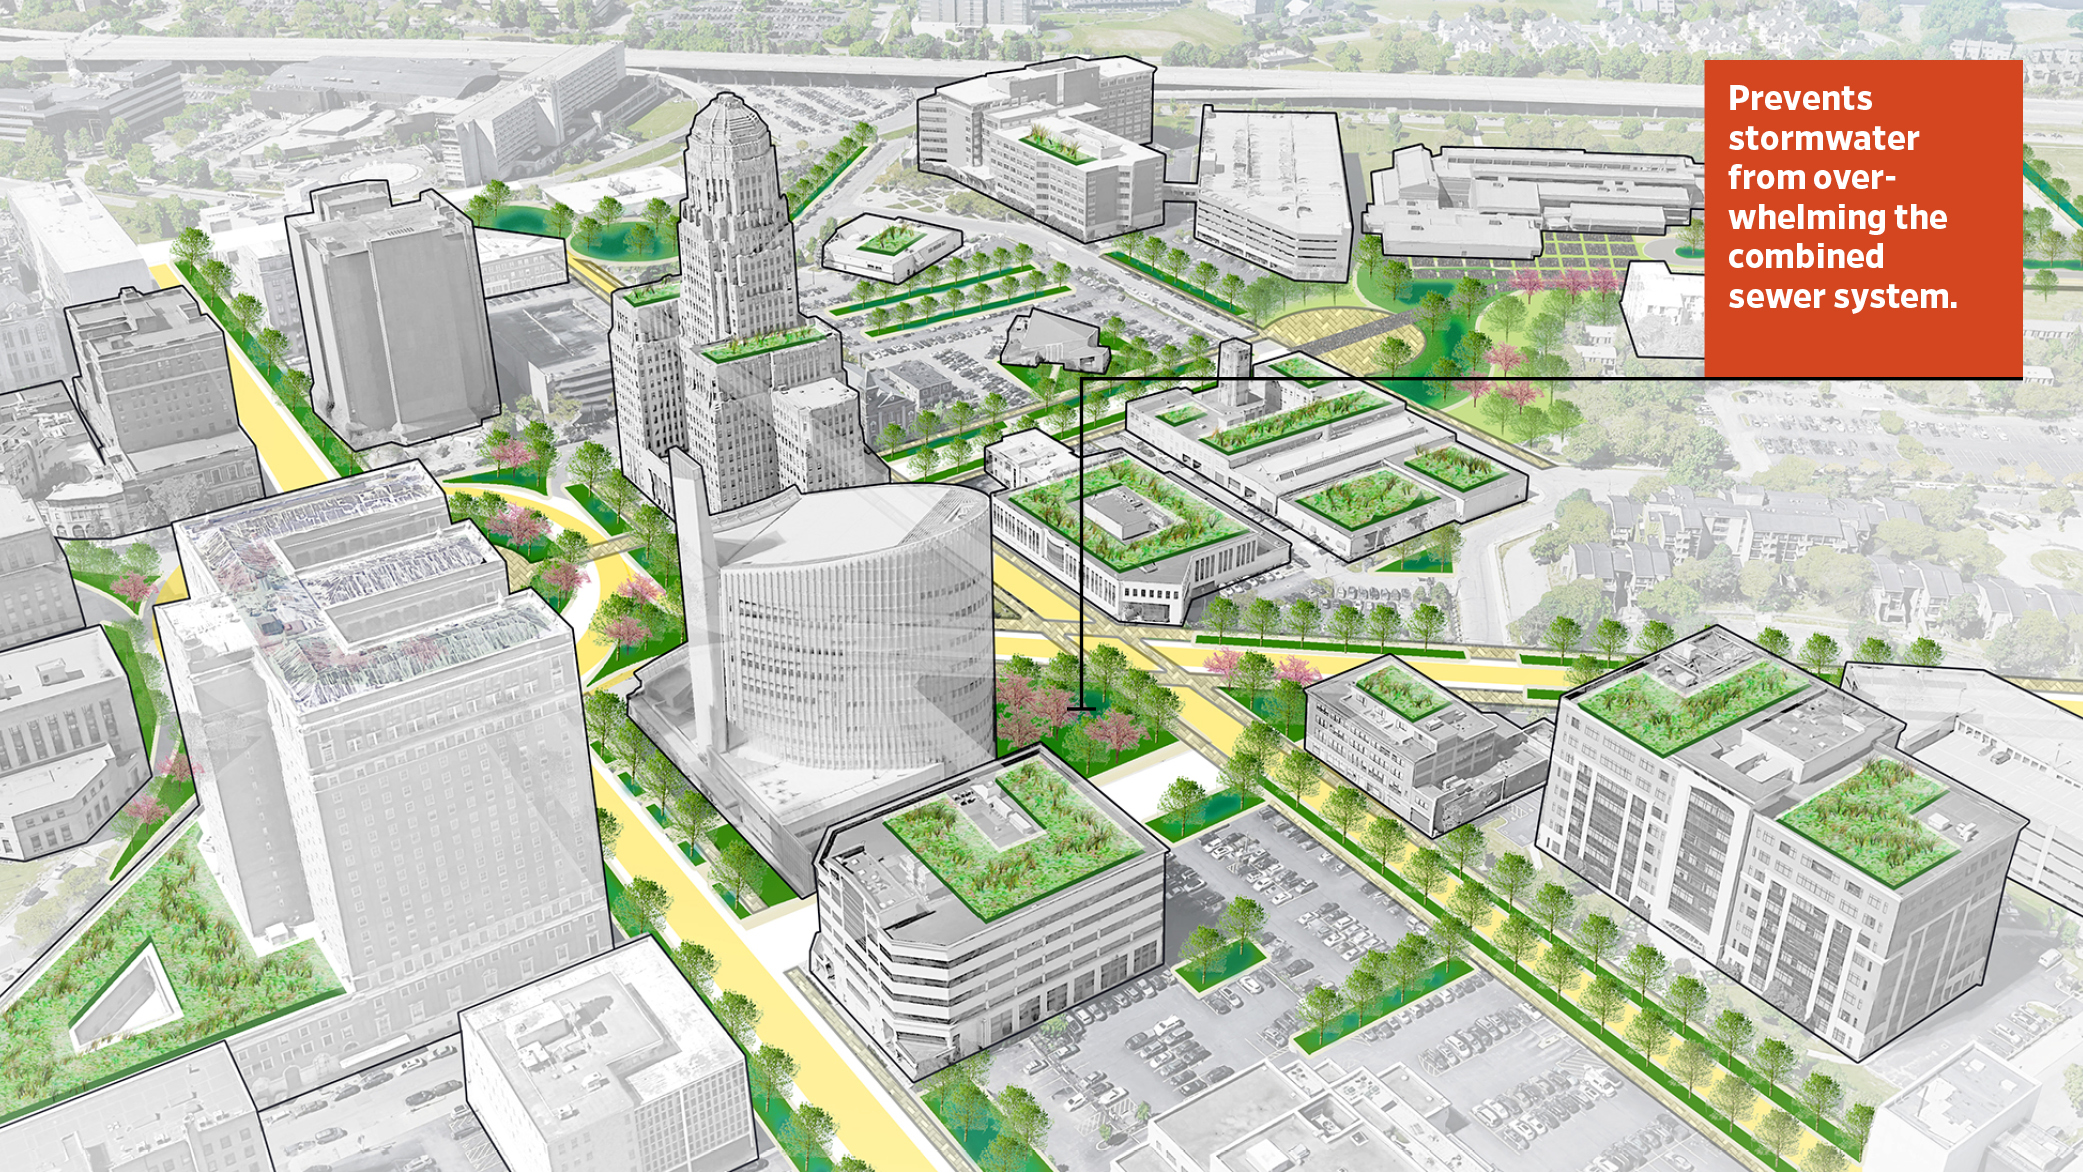 A rendering of downtown Buffalo with green infrastructure improvements, including green streets, rain gardens, and expanded tree canopies.